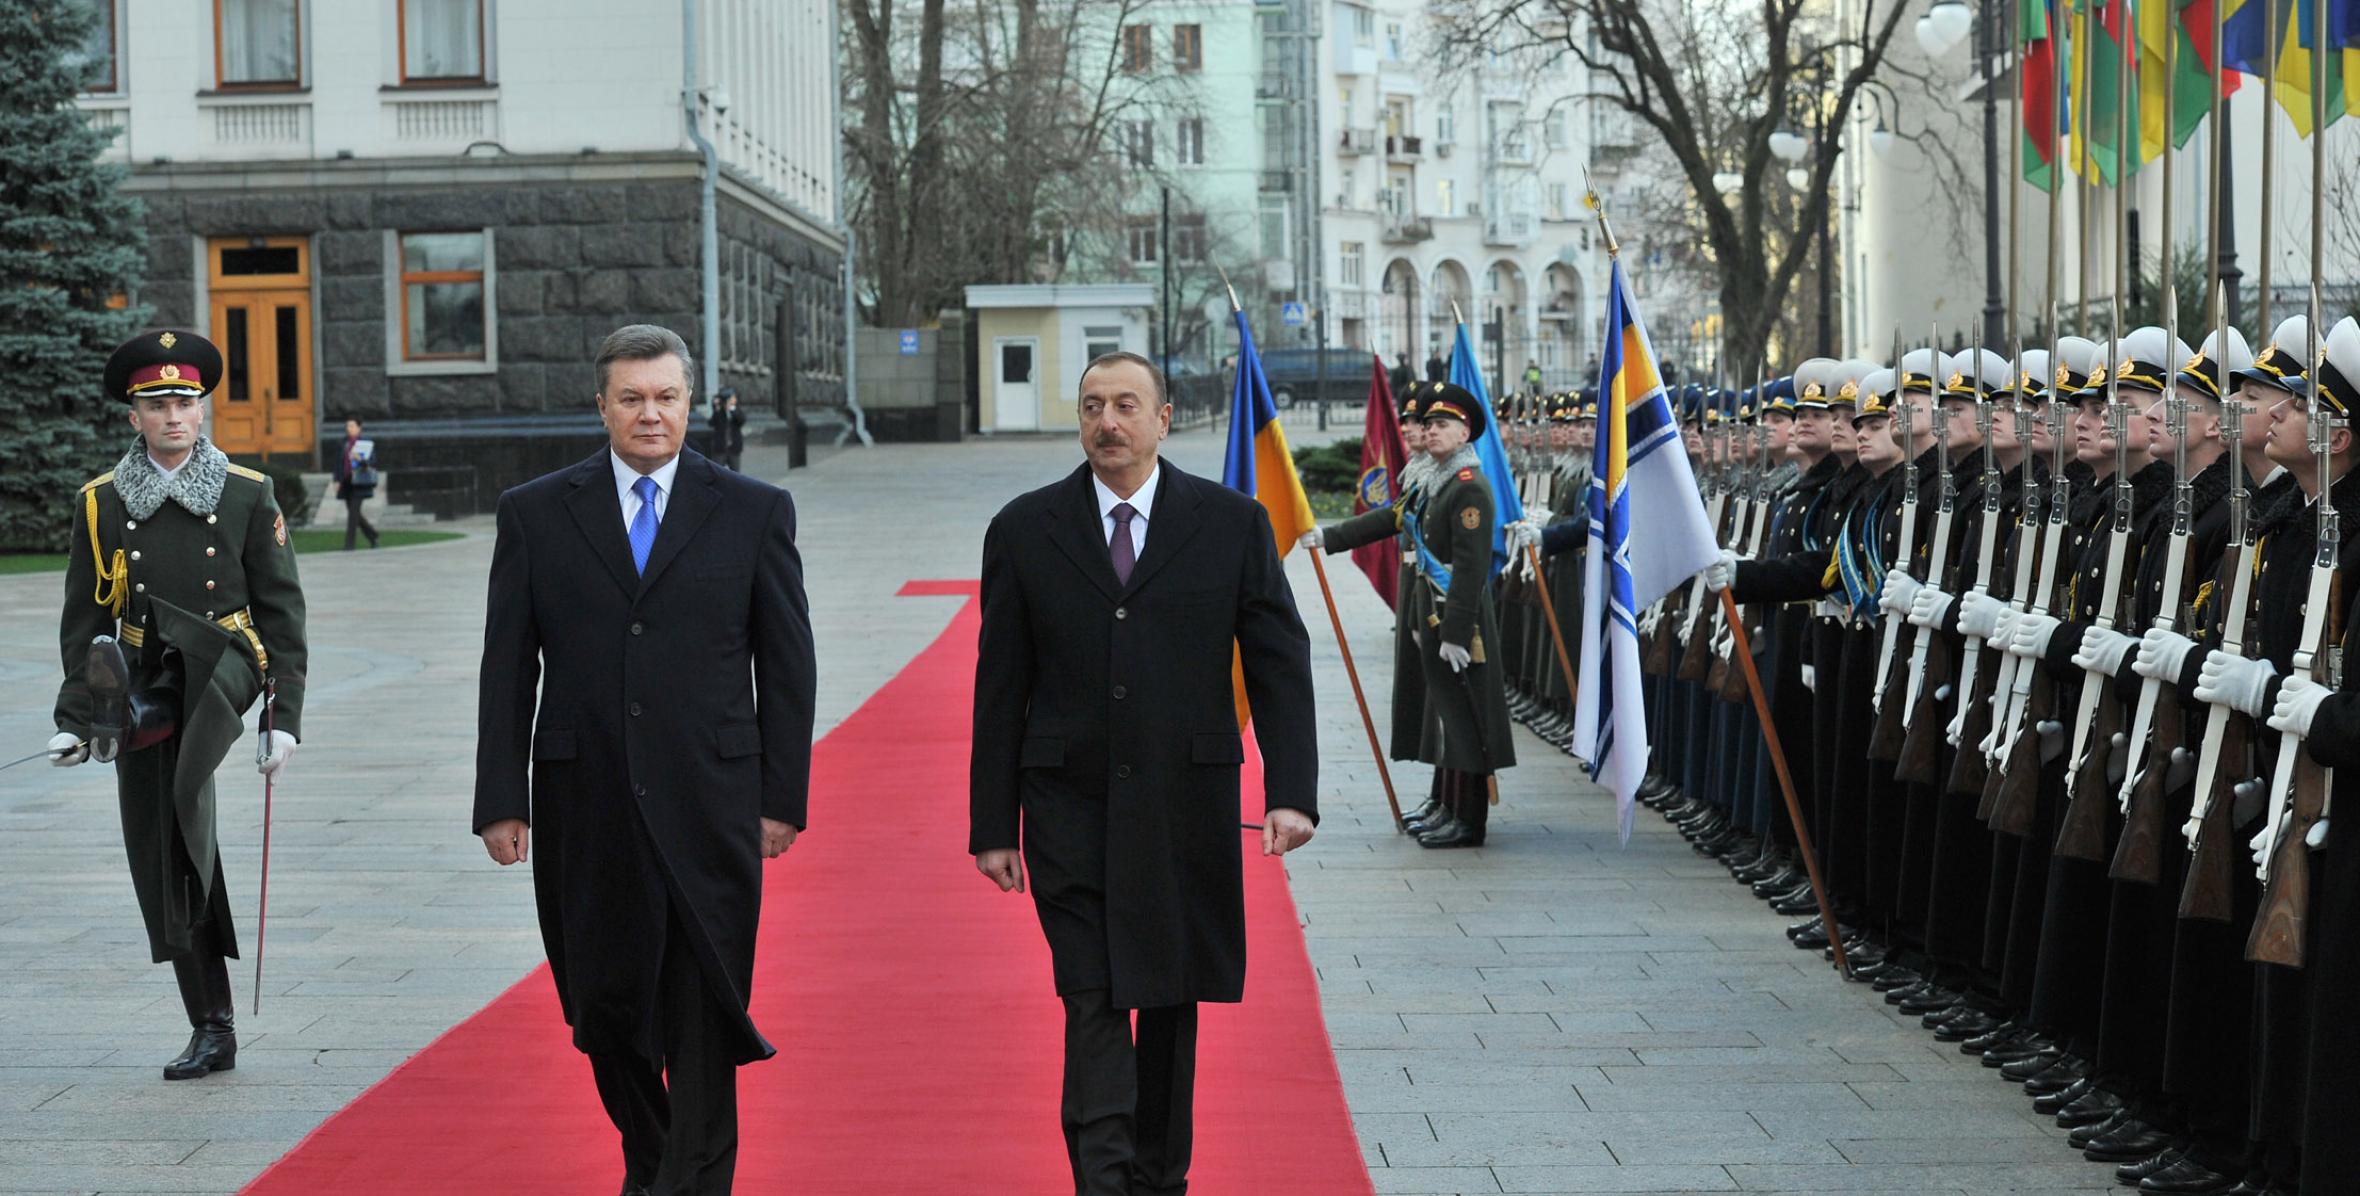 An official ceremony was held to welcome Ilham Aliyev